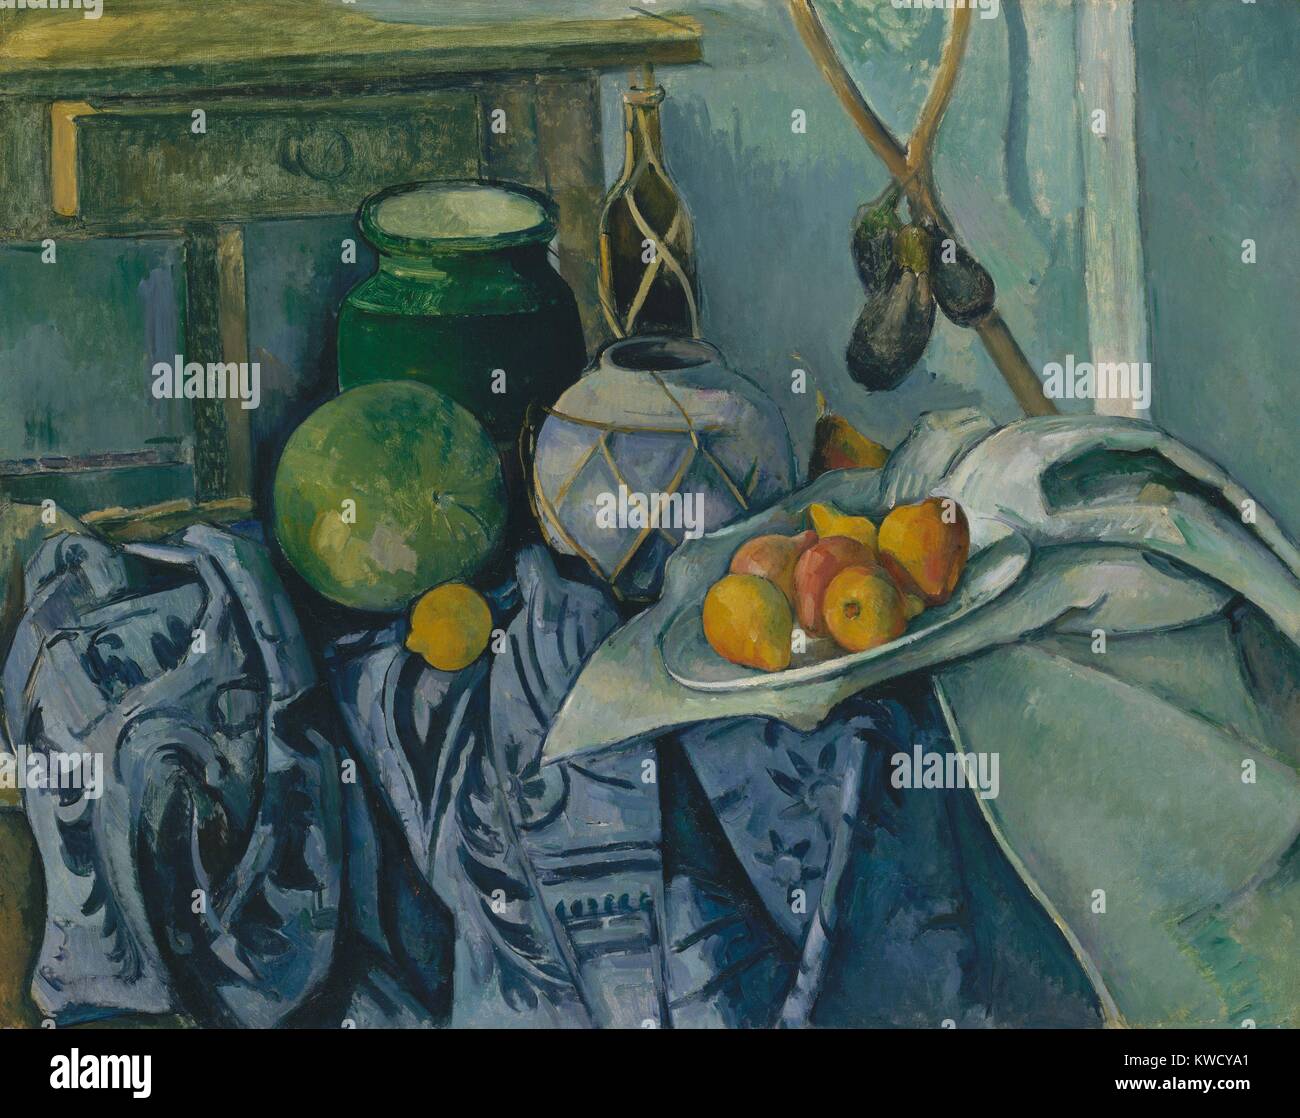 Still Life with a Ginger Jar and Eggplants, by Paul Cezanne, 1893-94, French Post-Impressionism. The artist relaxed traditional rules of perspective, and integrated different visual viewpoints within the same still life painting (BSLOC 2017 5 25) Stock Photo